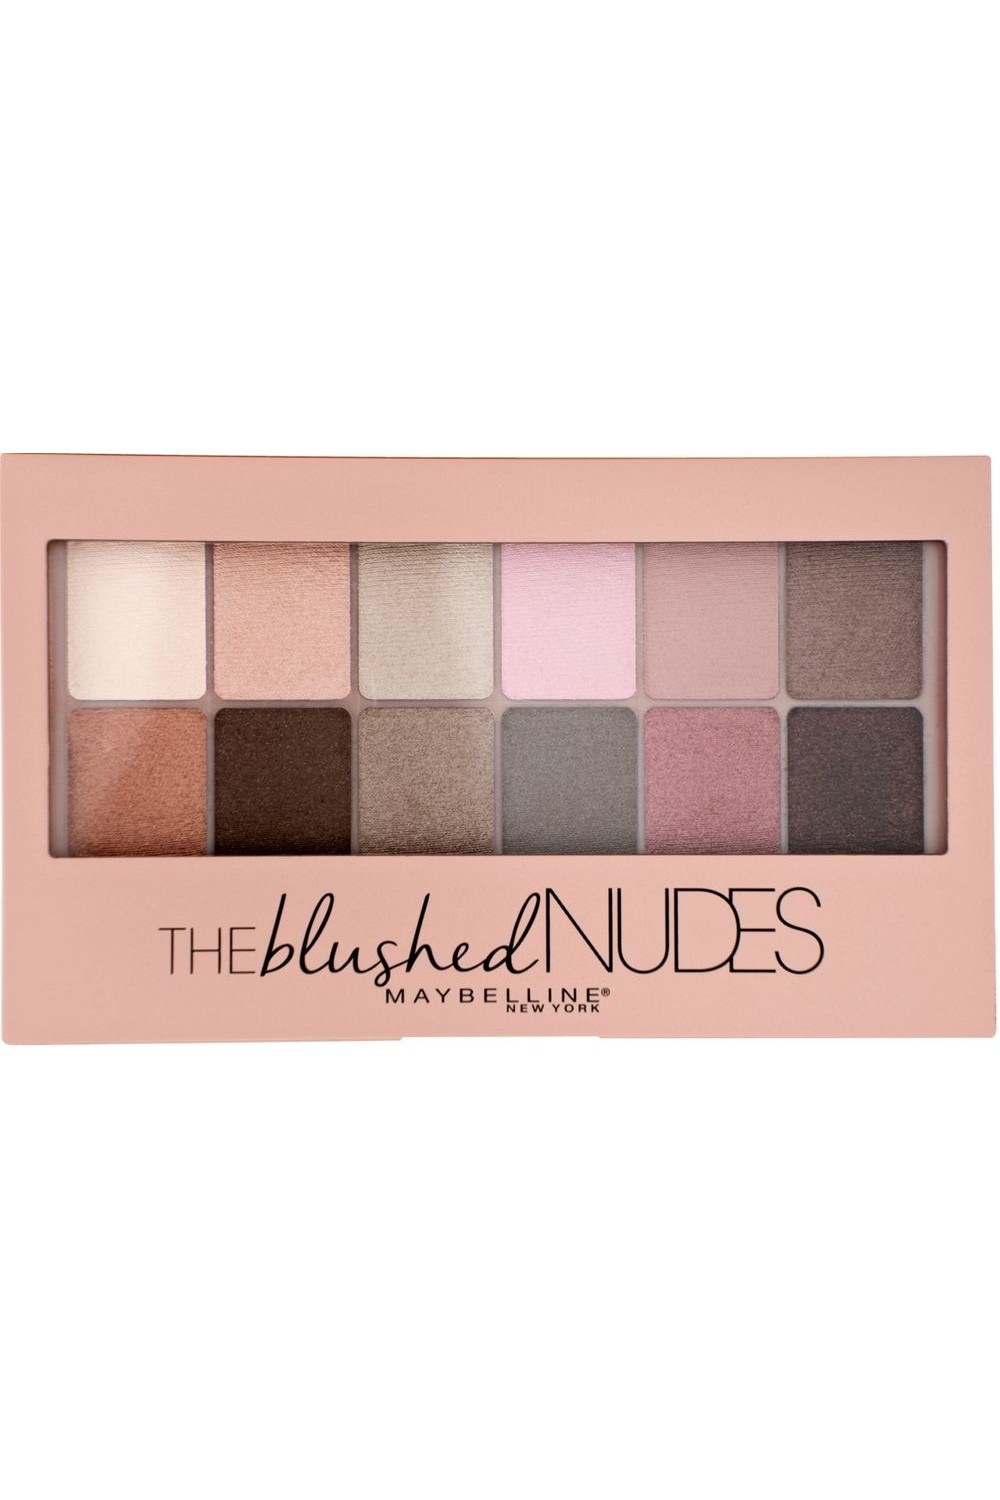 Maybelline The Blused Nudes Eye Shadow Palette See It On You